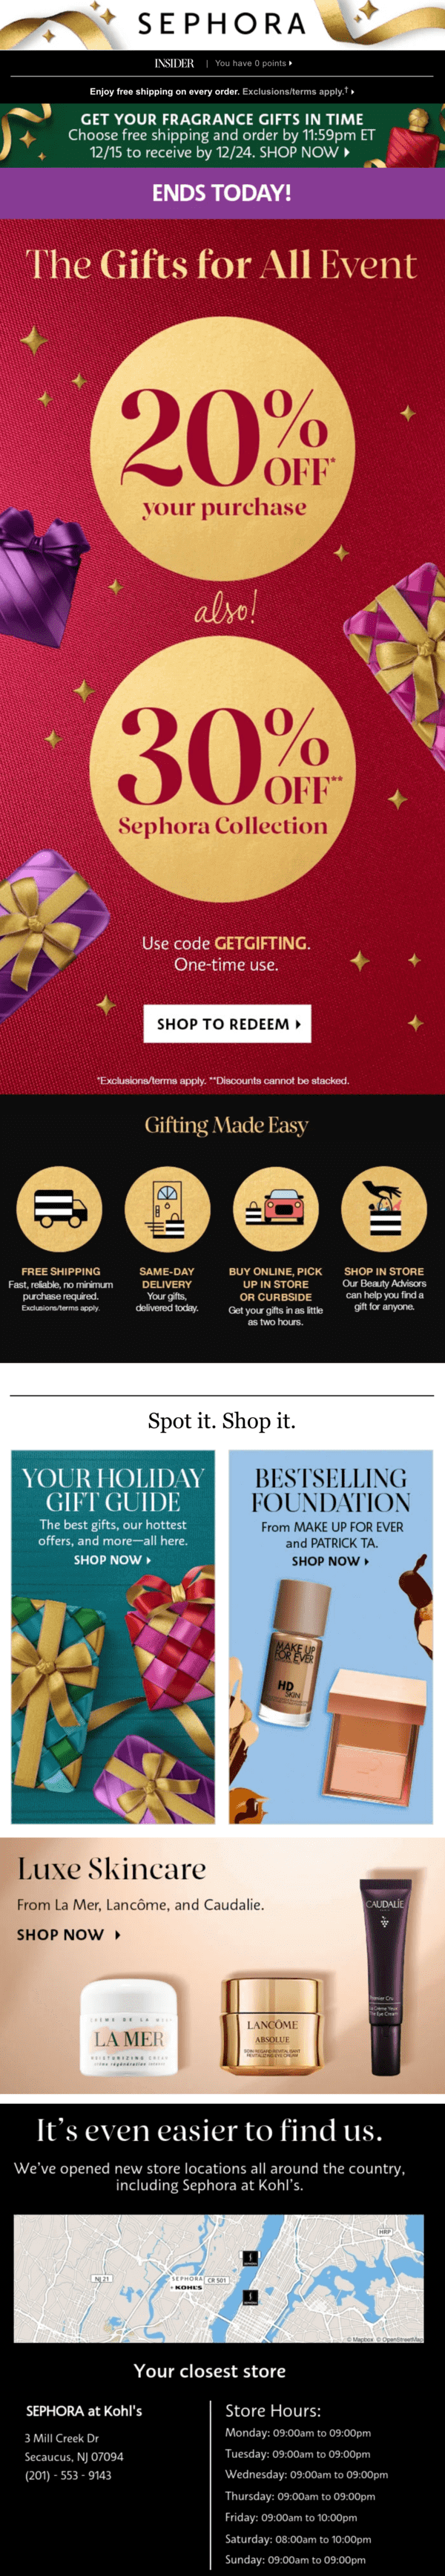 A Sephora email with a one-time discount code, product recommendations, and the shop’s advantages listed.